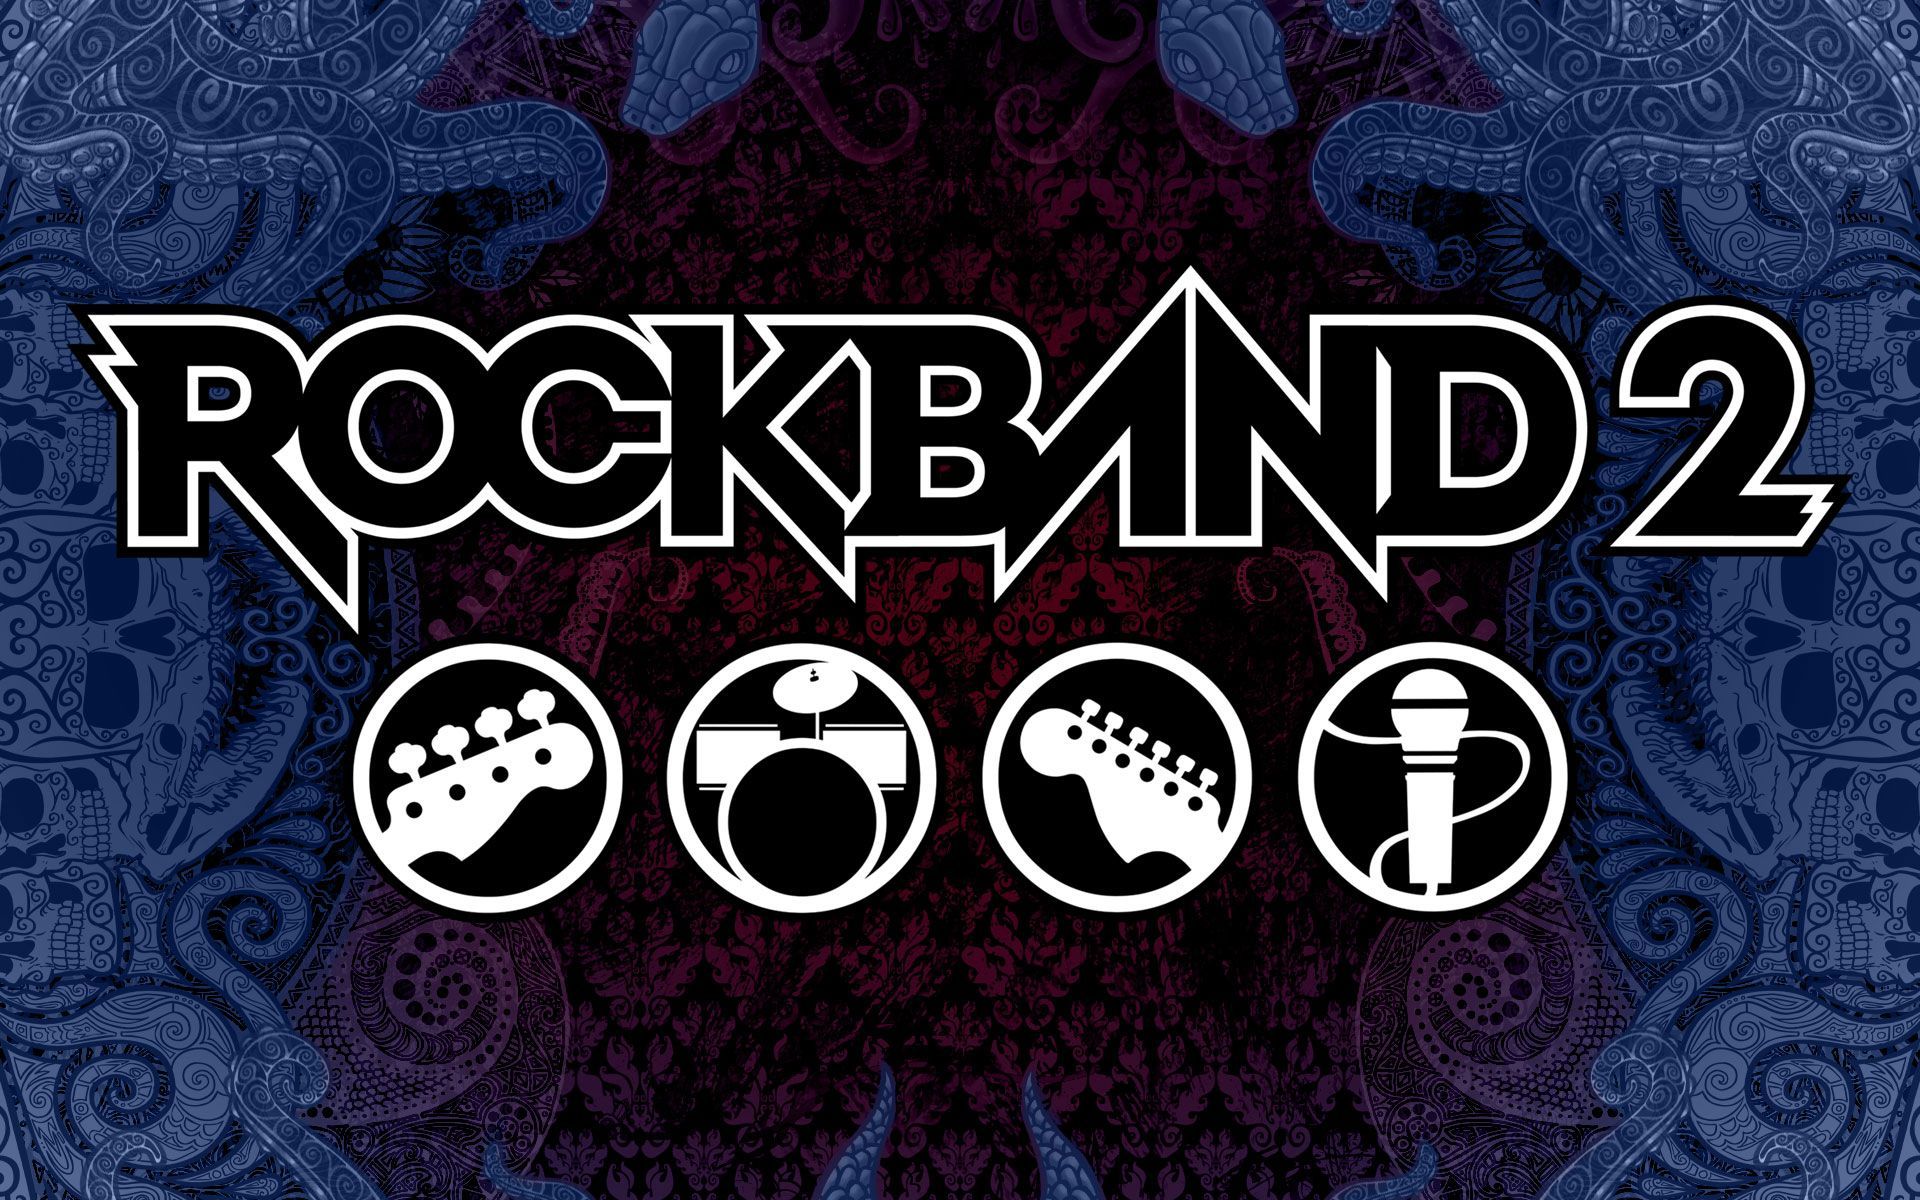 Rock Band 2 game wallpaper Wallpapers - HD Wallpapers 84197